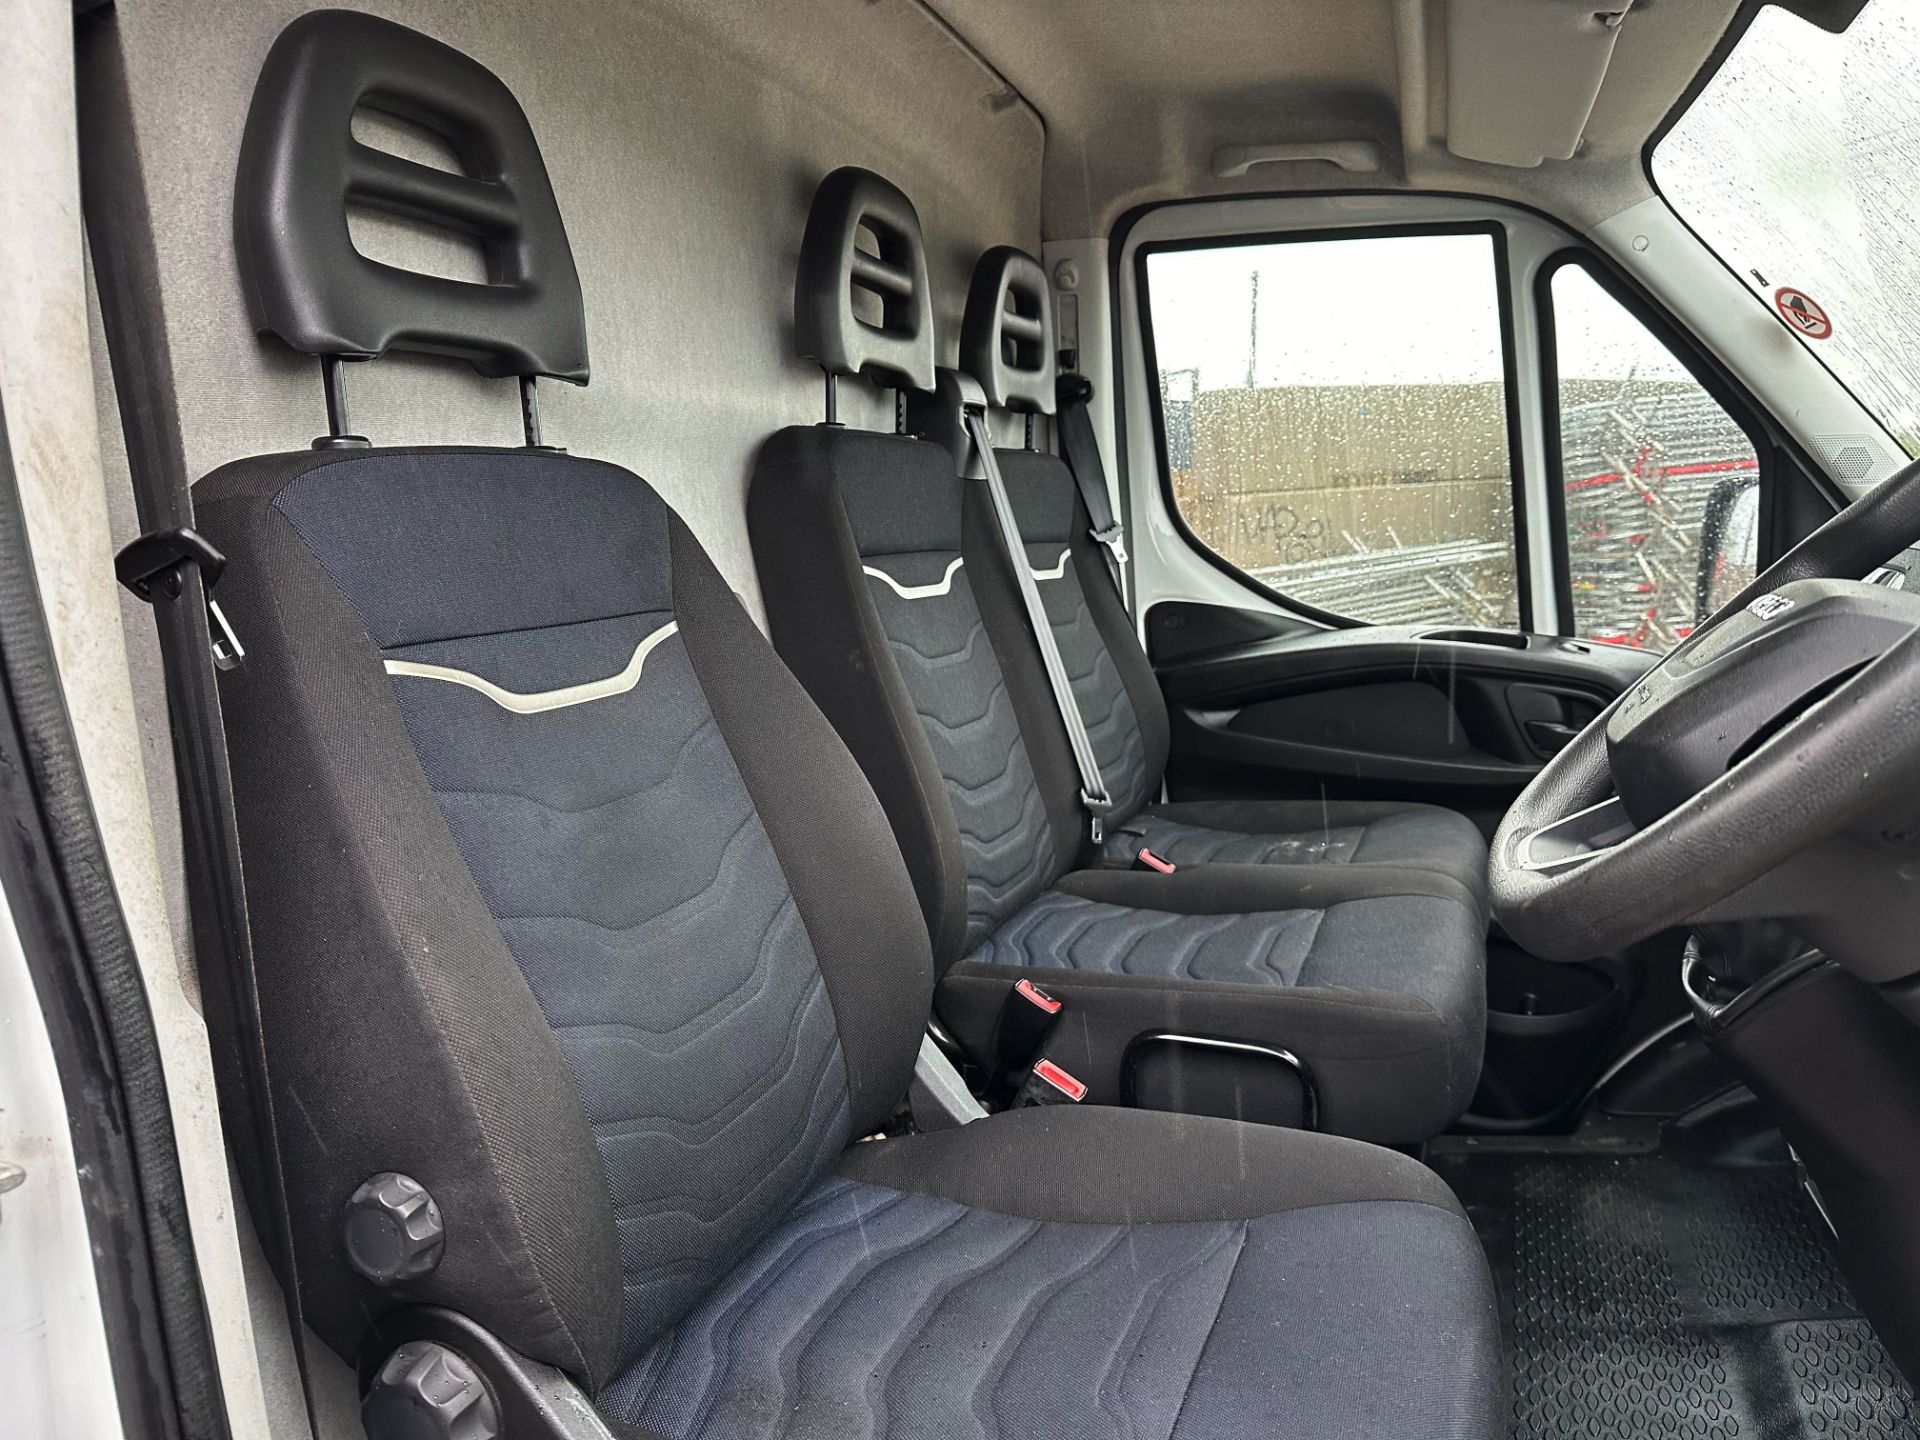 Iveco Daily 35-140 Long Wheel Base High Roof - 2021 Reg (New Shape) Only 85K Miles - Air Con - Look! - Image 18 of 27